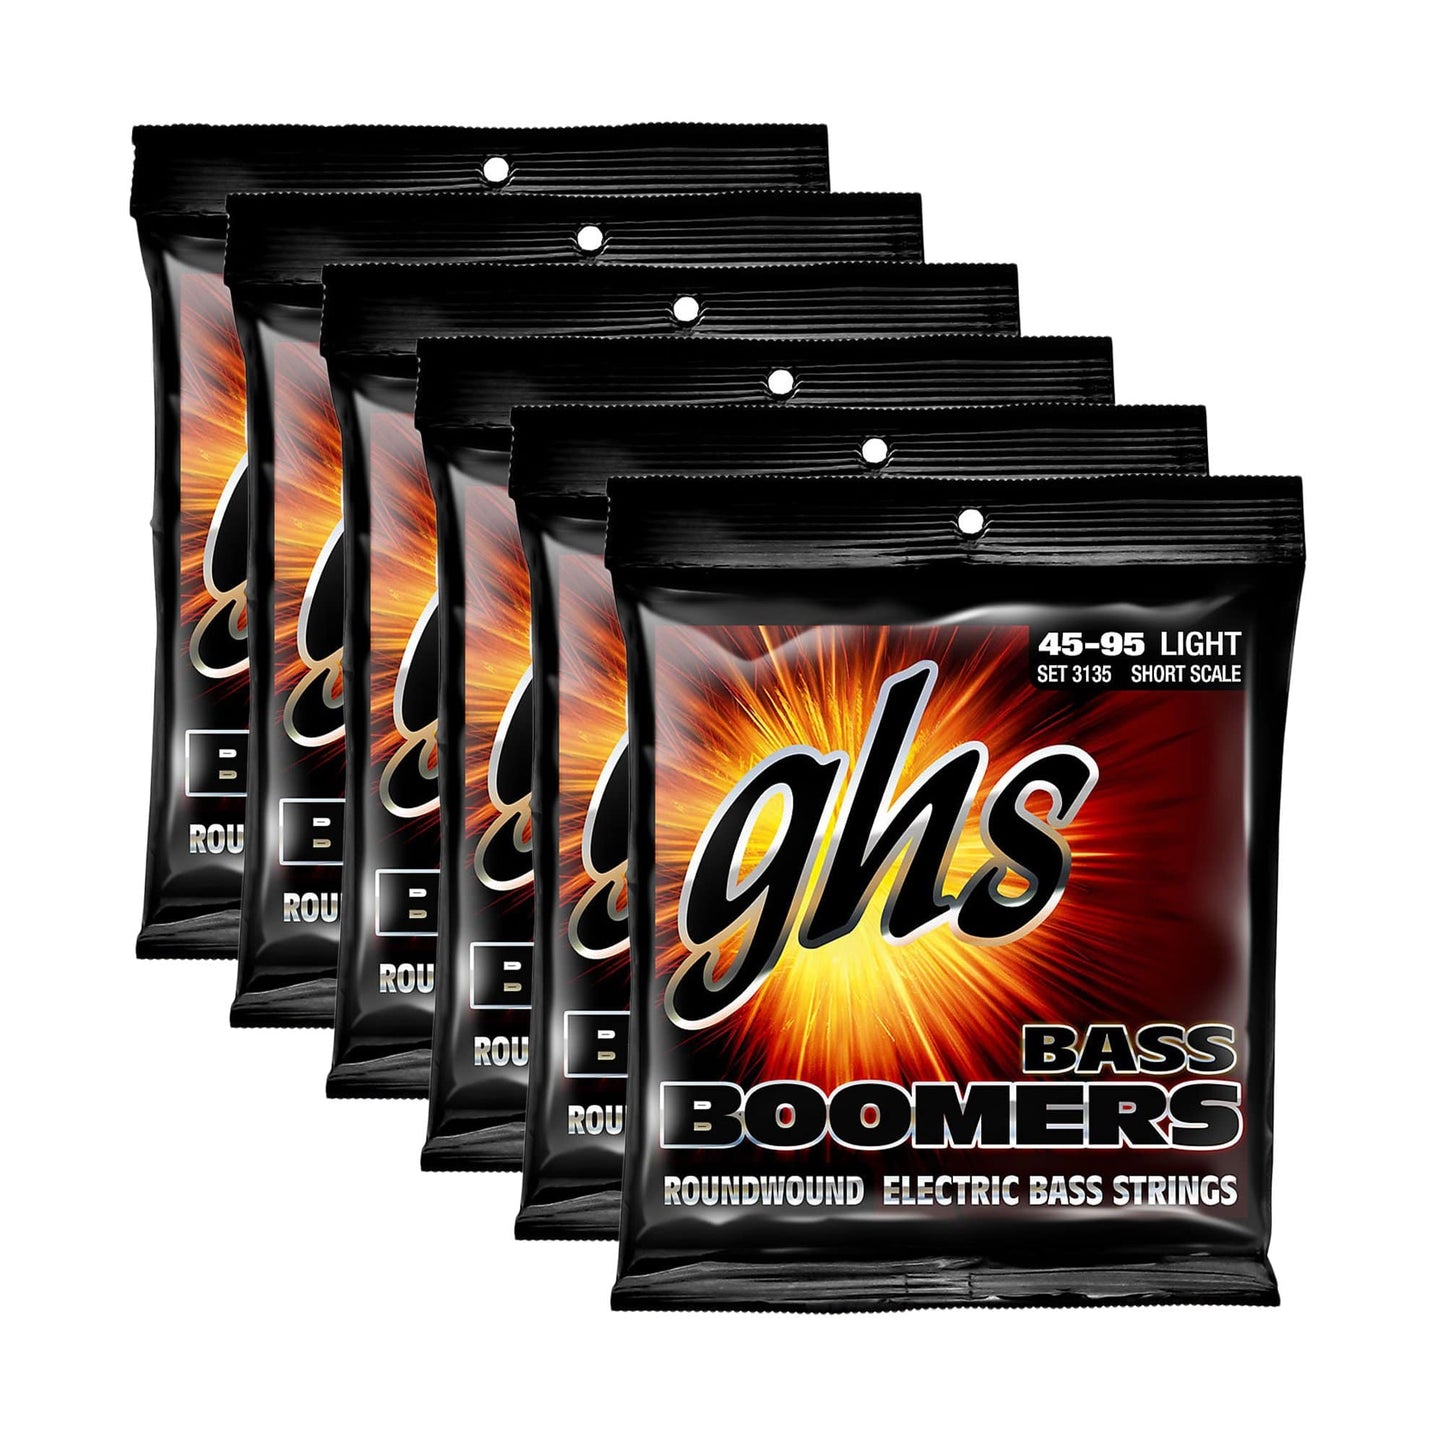 GHS 3135 Bass Boomers 45-95 Short Scale 6 Pack Bundle Accessories / Strings / Bass Strings